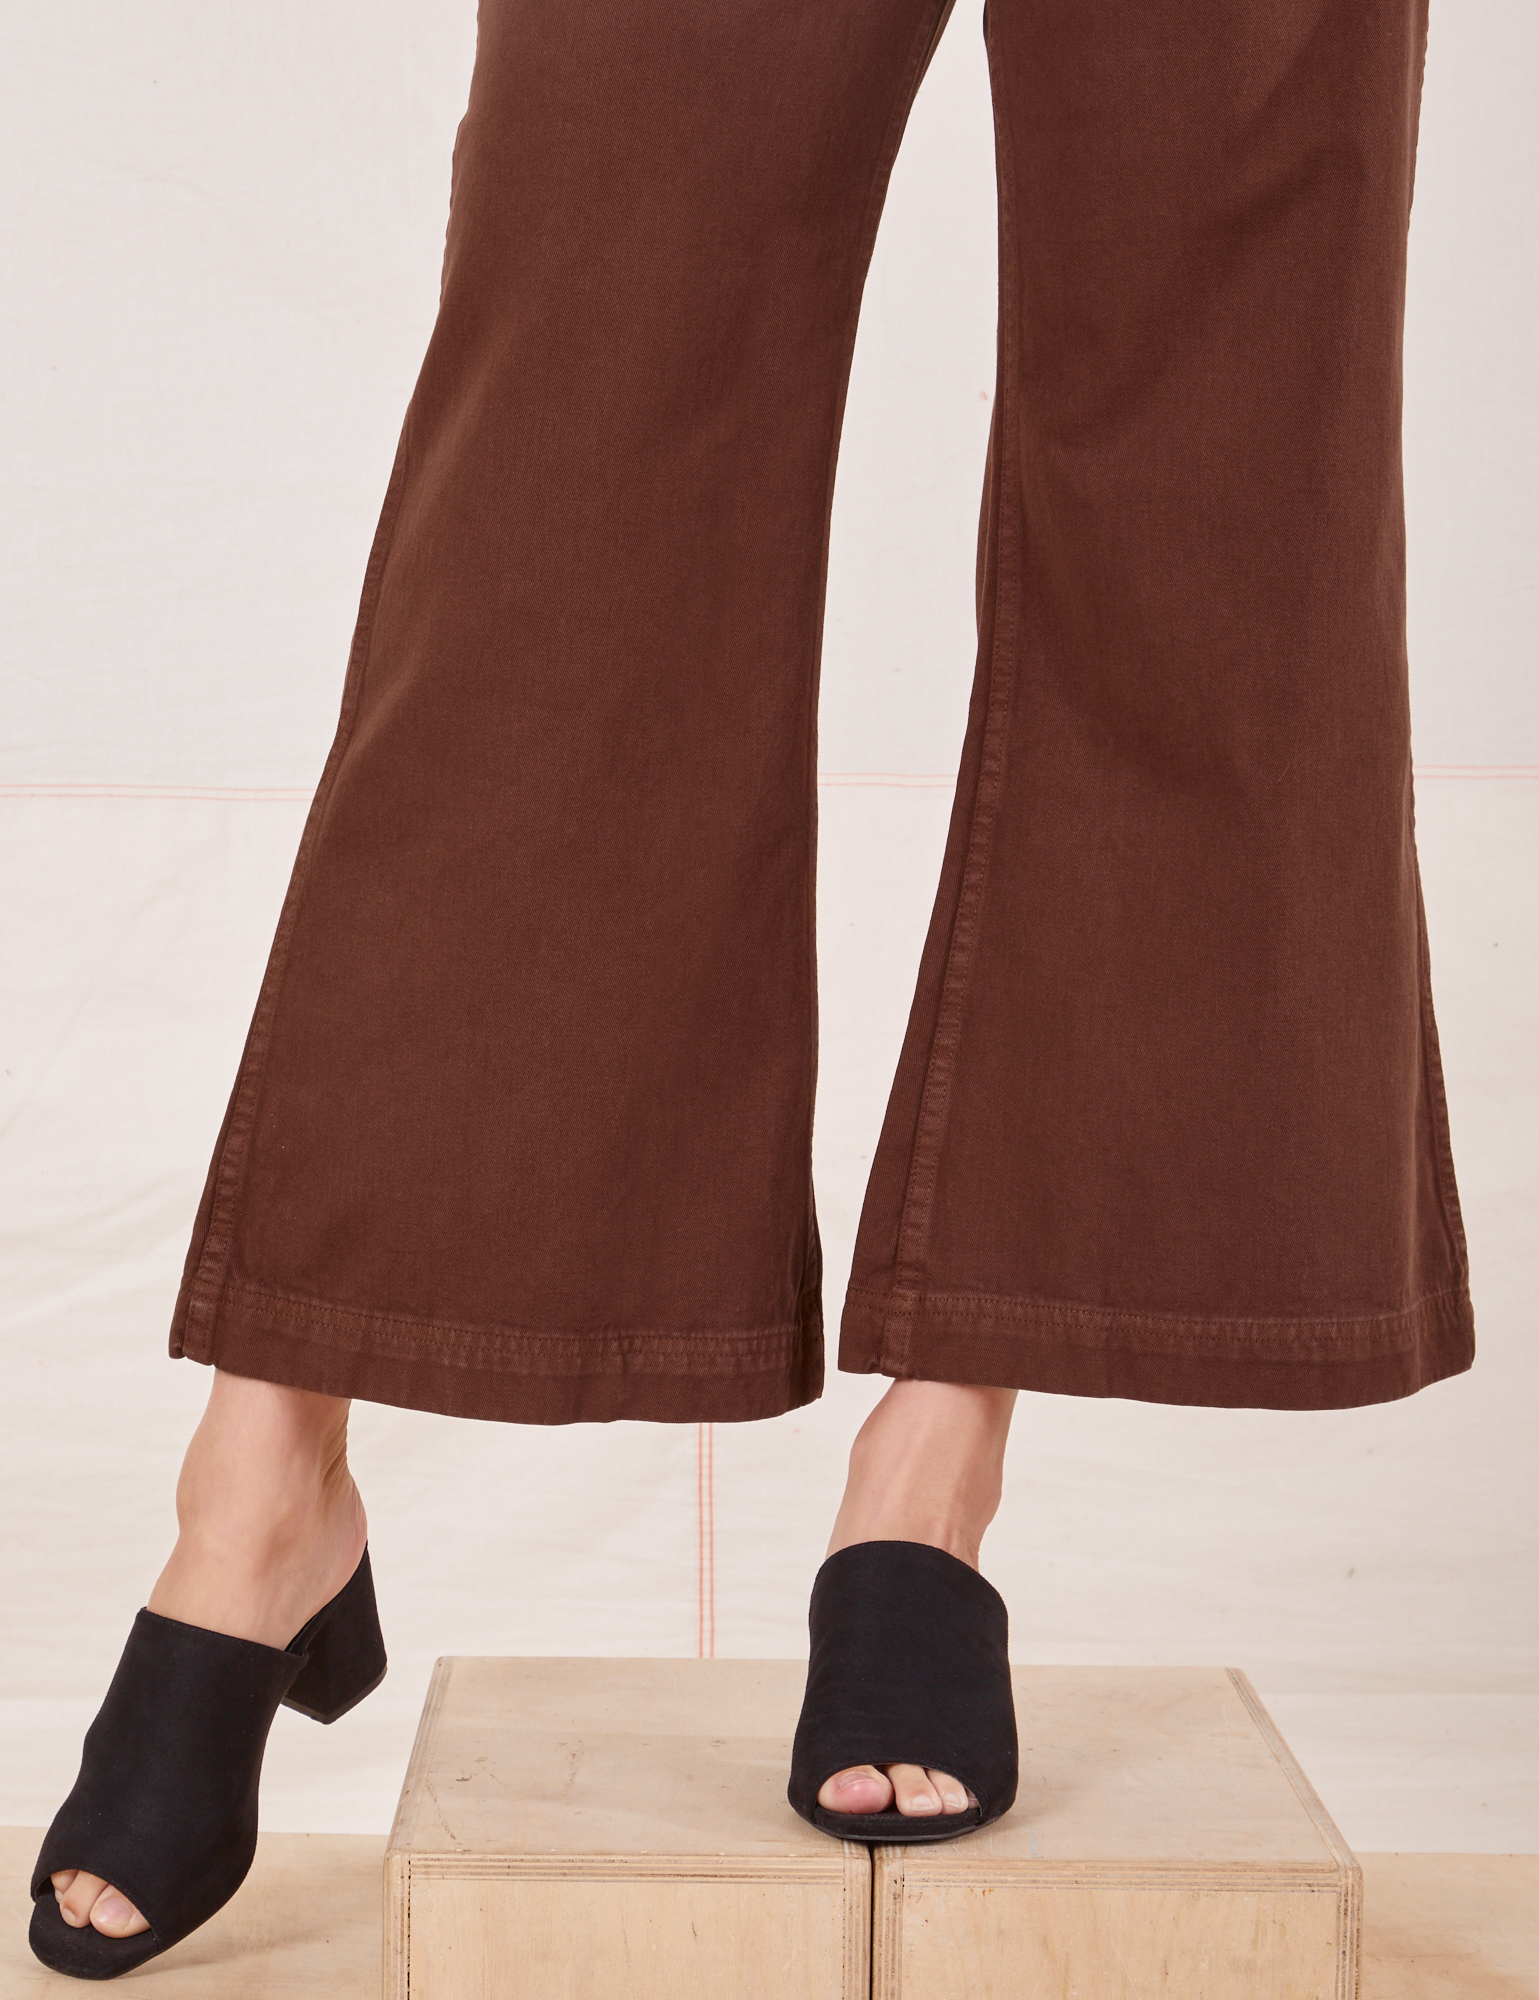 Bell Bottoms in Fudgesicle Brown pant leg close up on Alex